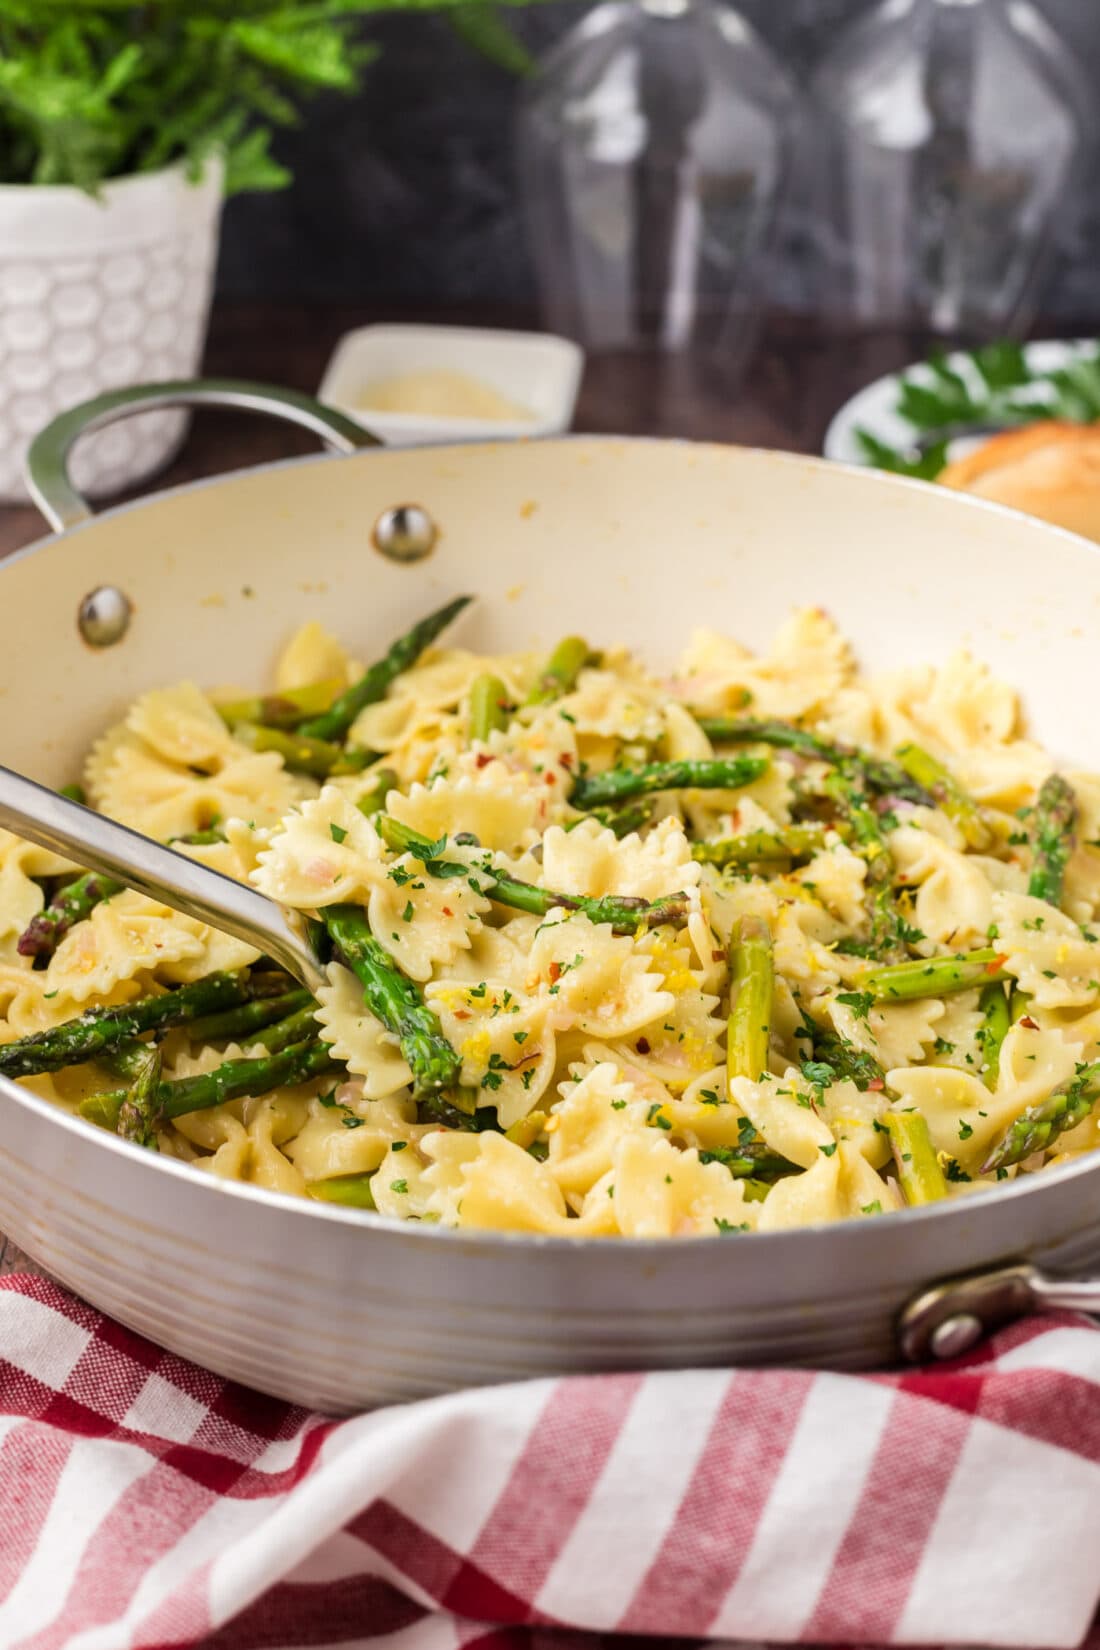 Spoon in a skillet of Asparagus Pasta